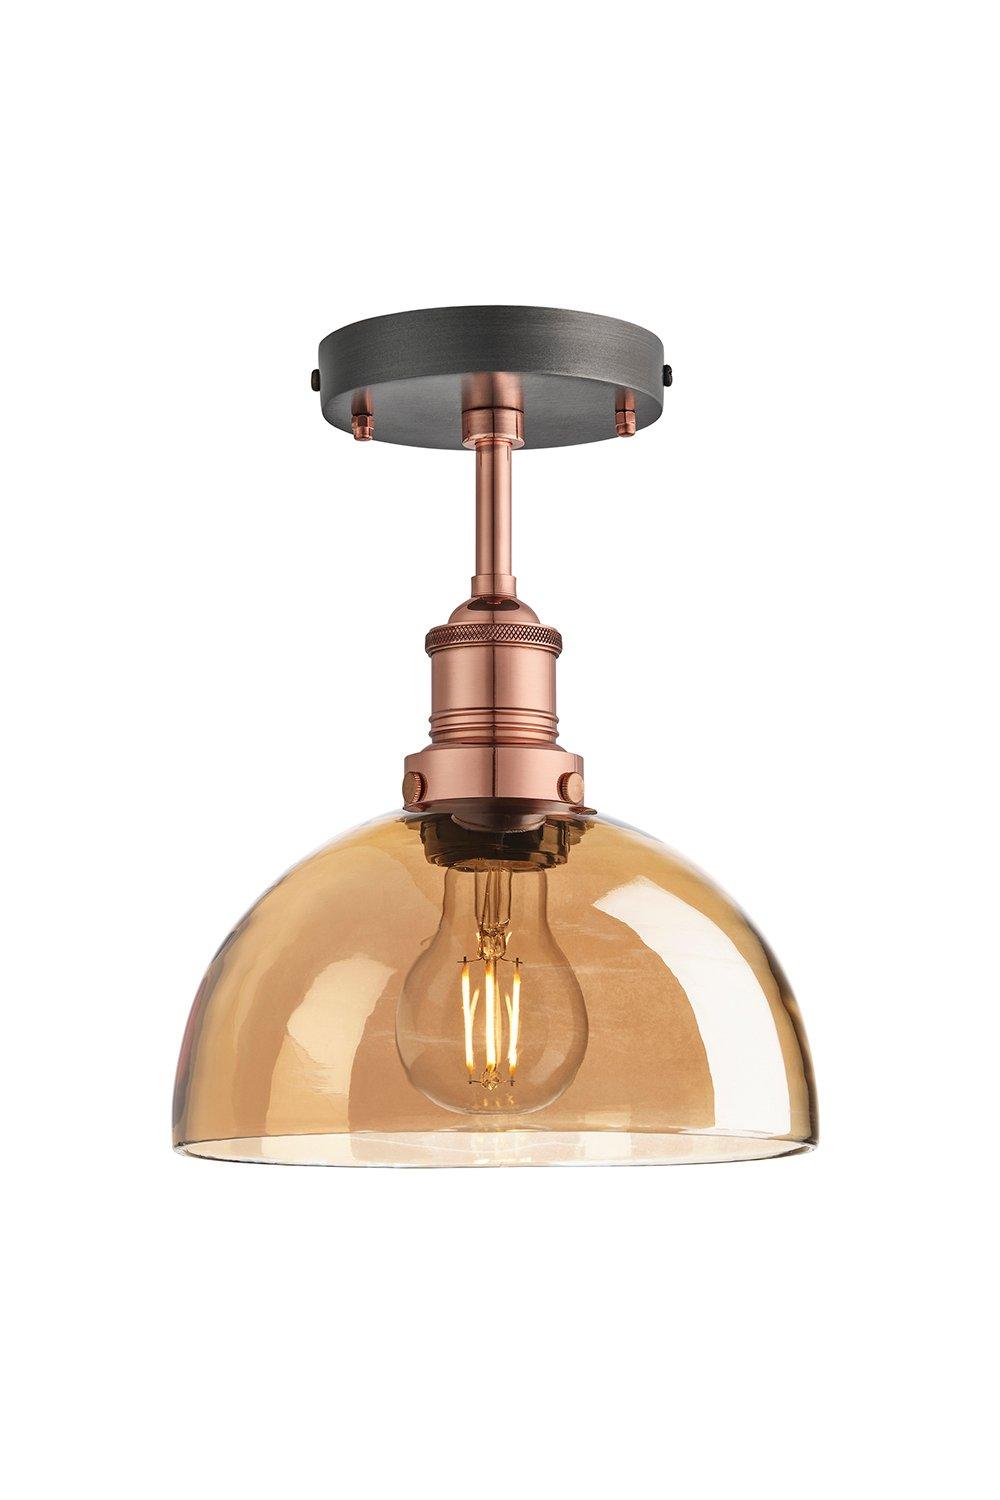 Brooklyn Tinted Glass Dome Flush Mount, 8 Inch, Amber, Copper Holder